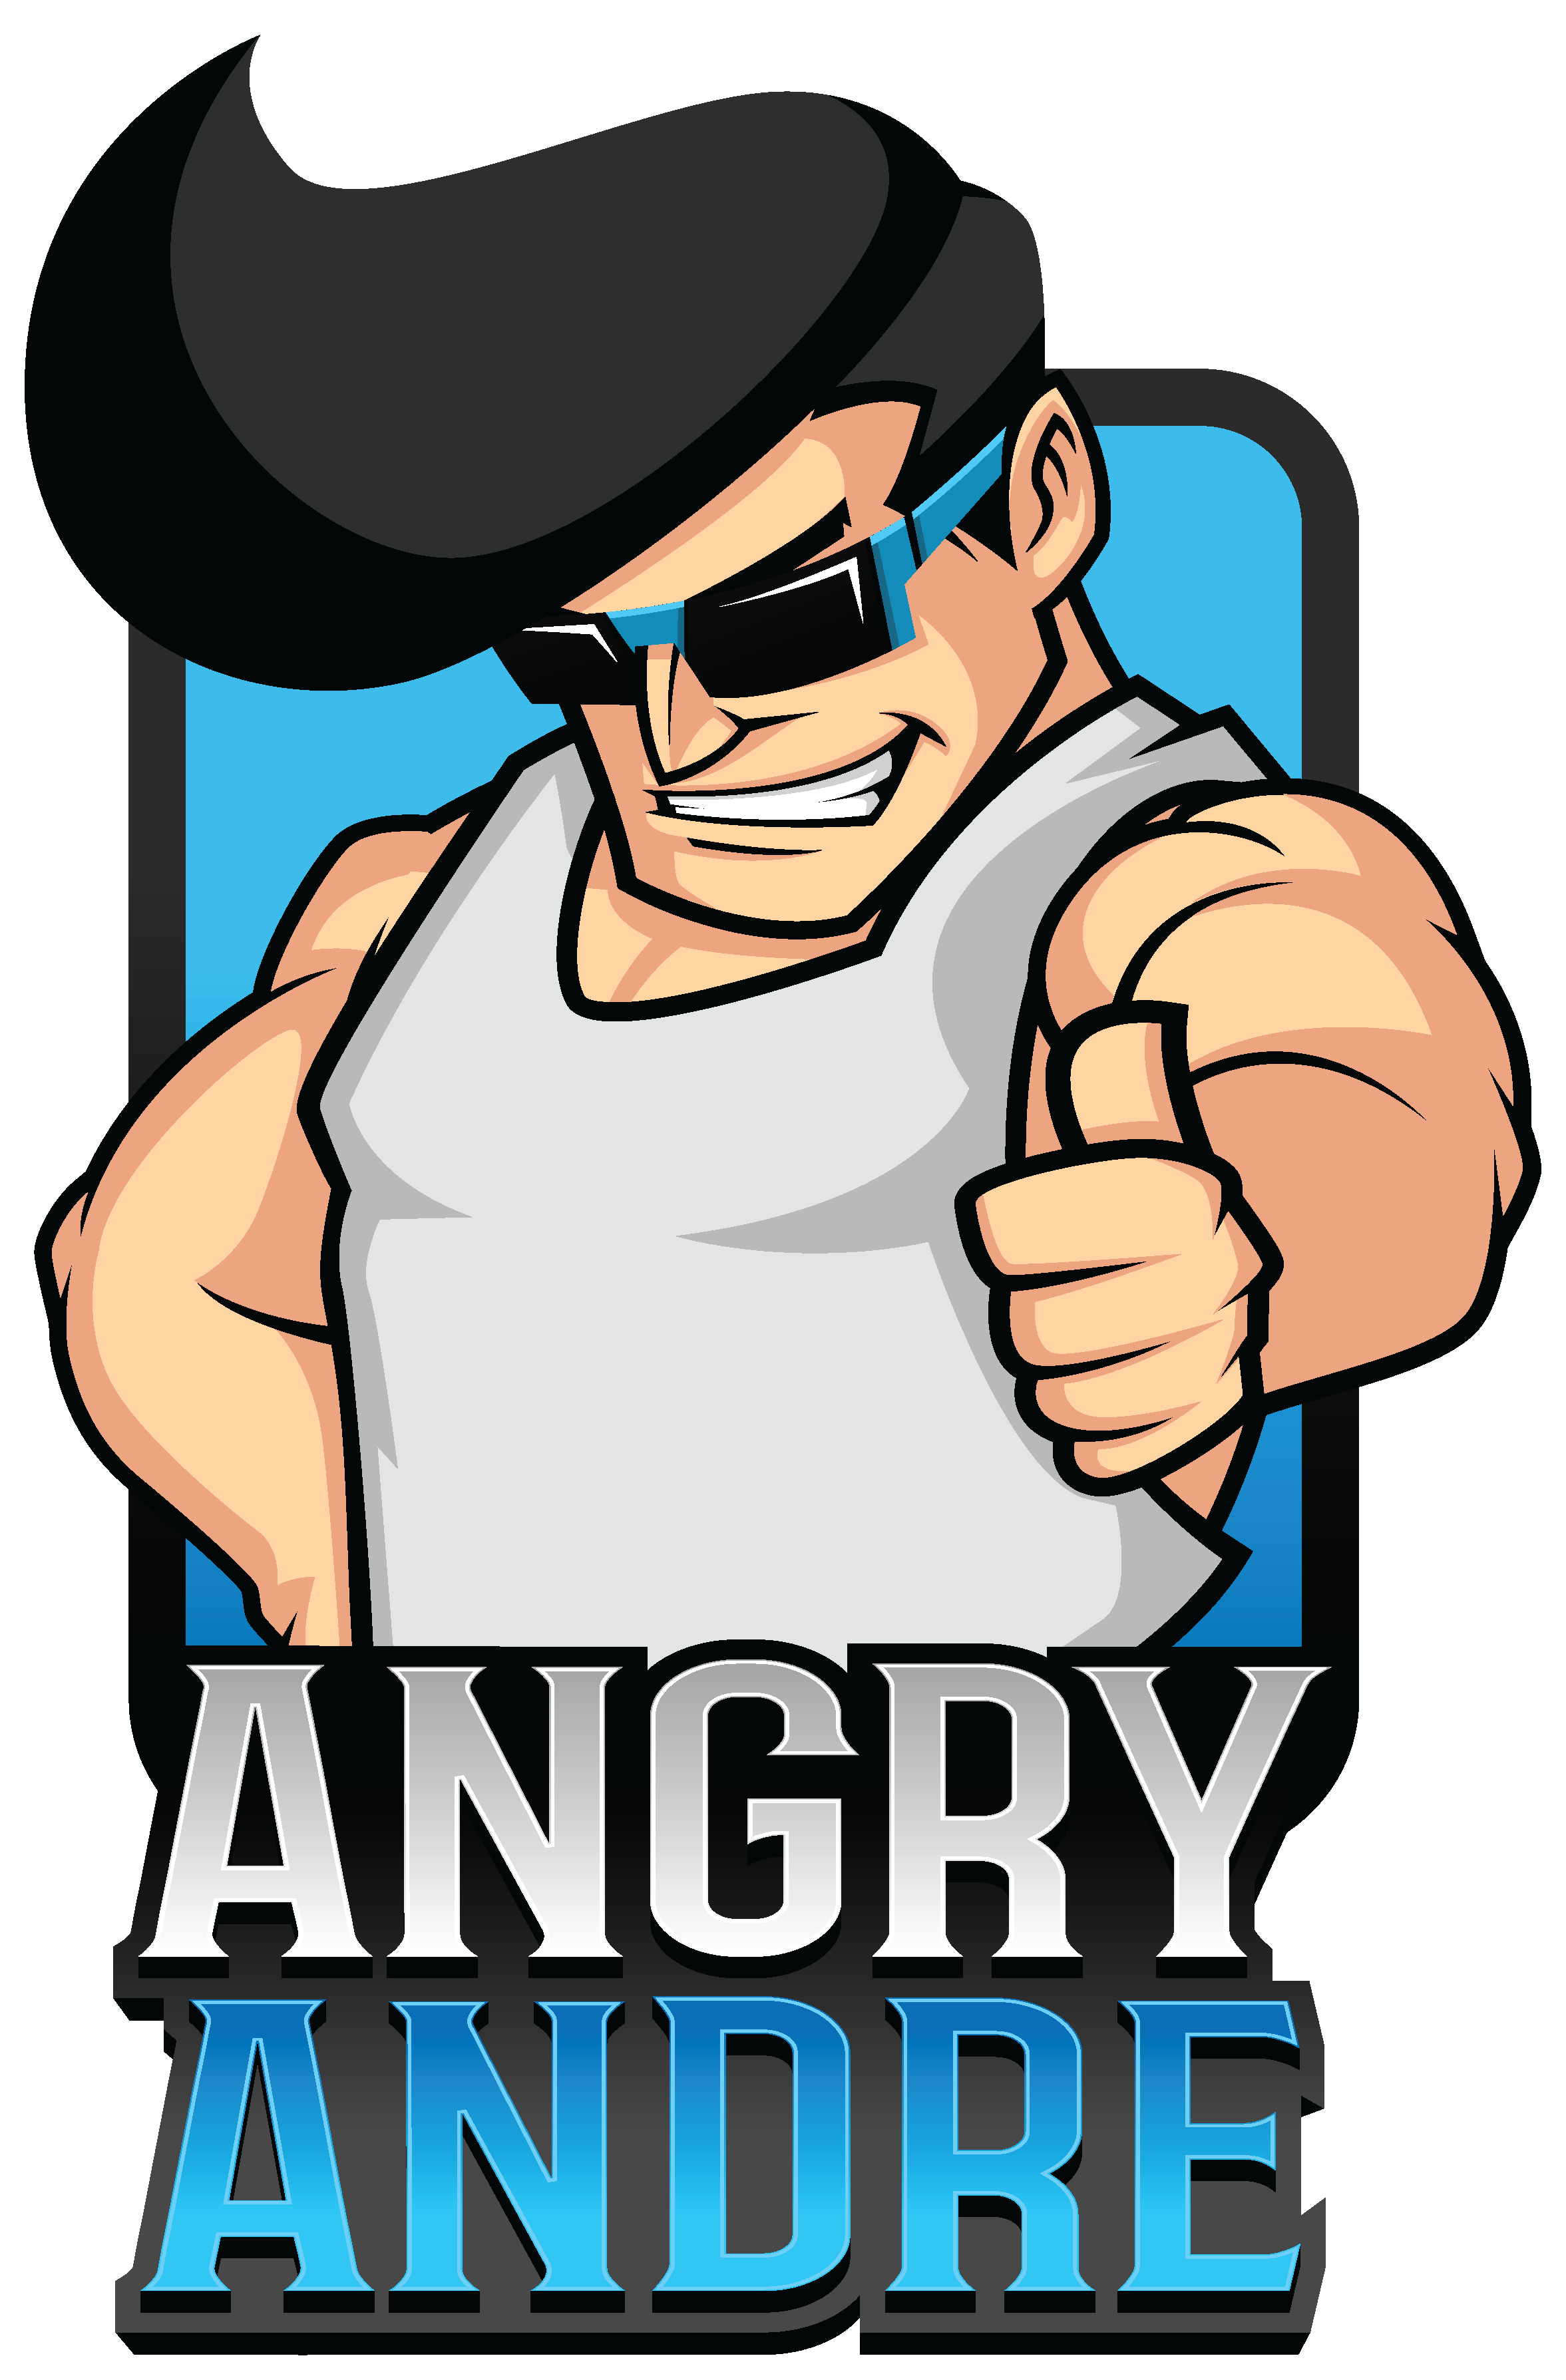 Librarian clipart angry, Librarian angry Transparent FREE.